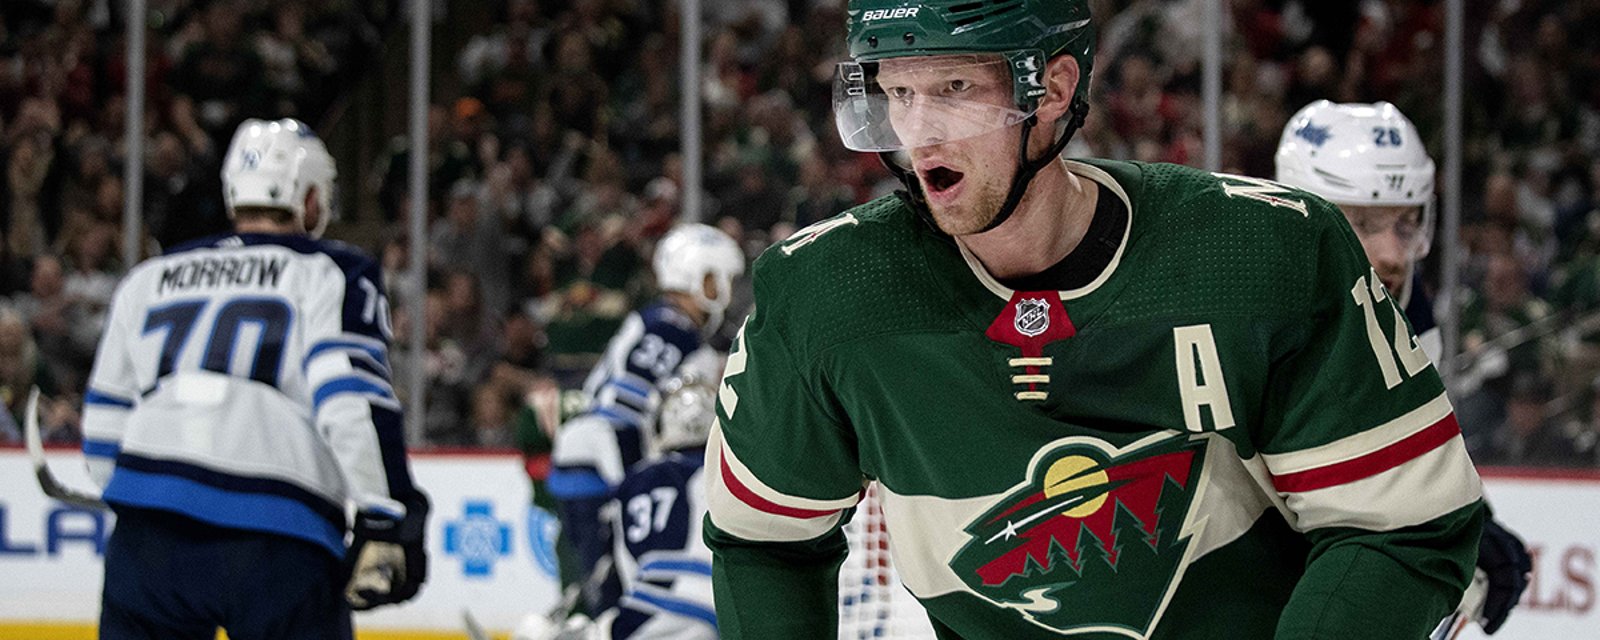 Report: Staal generating “significant interest” on trade market